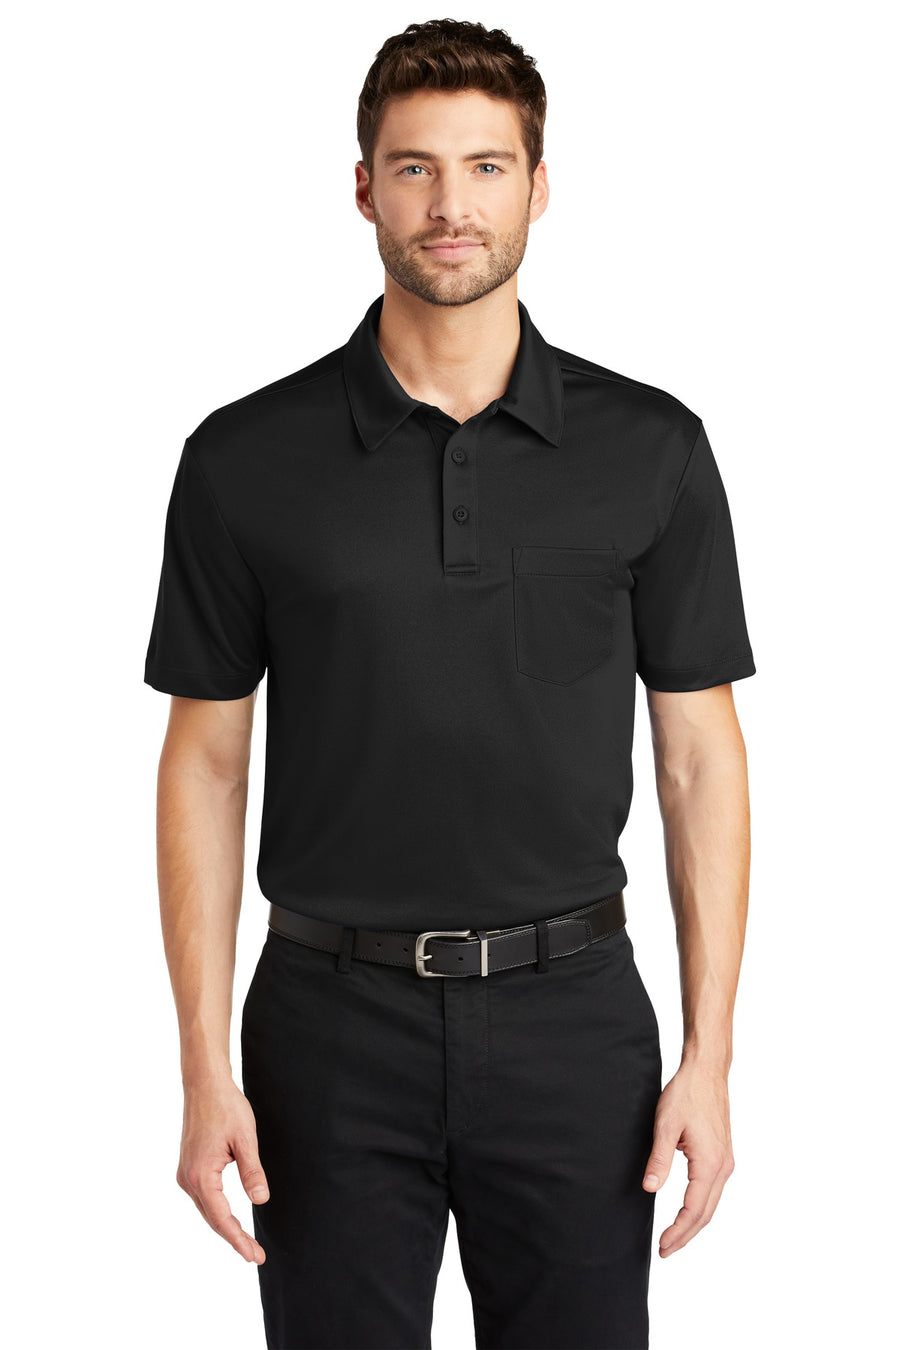 Port Authority Silk Touch Performance Pocket Polo.